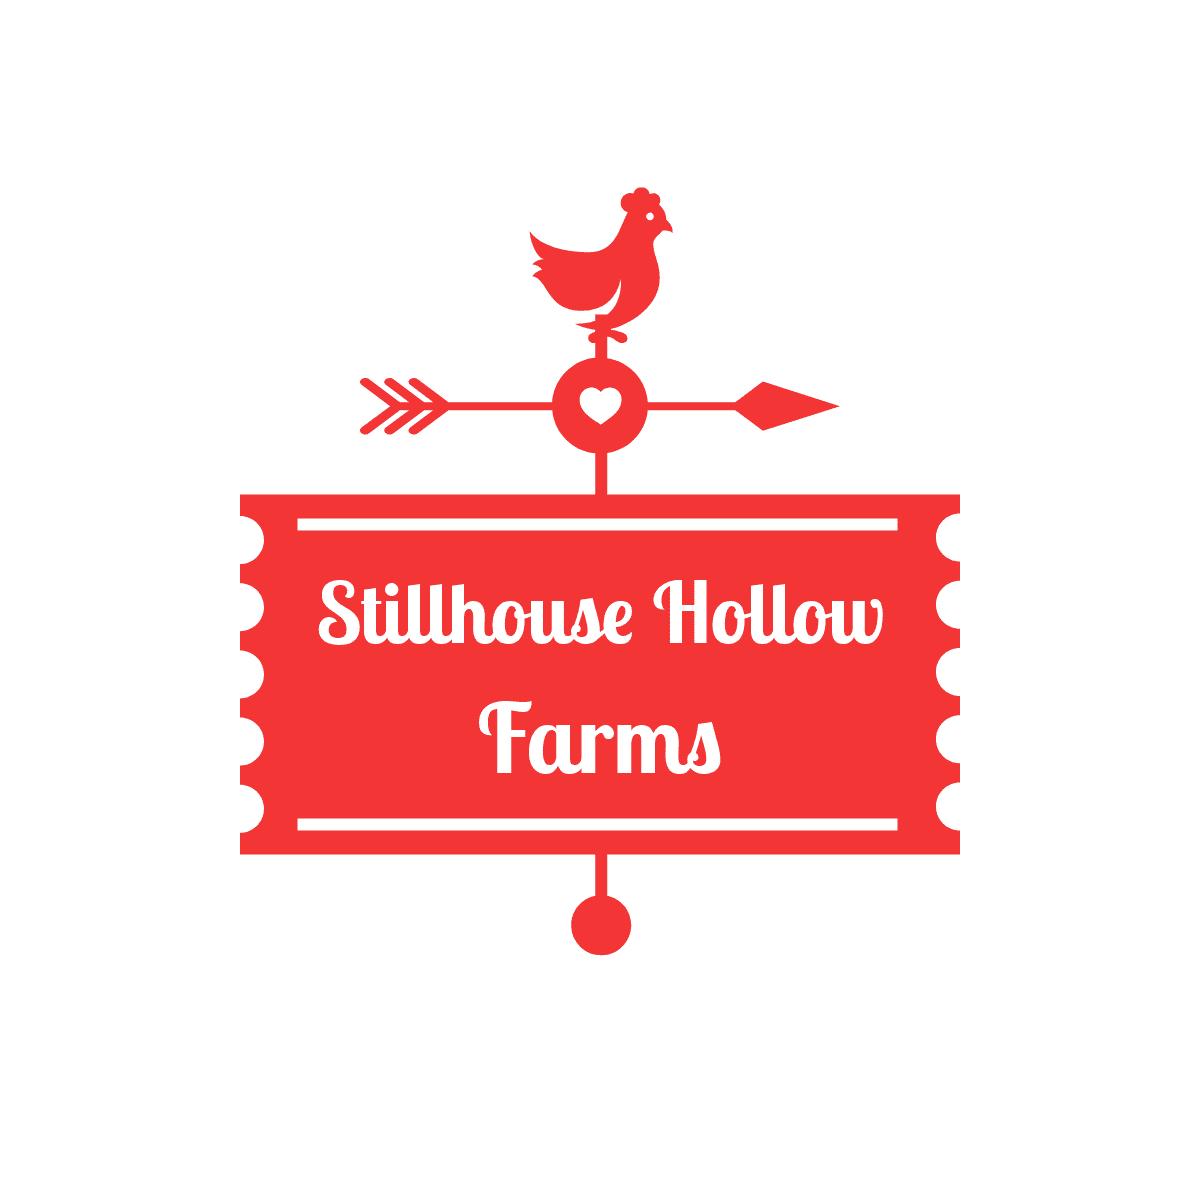 Stillhouse Hollow Farms logo, a red chicken-topped weathervane